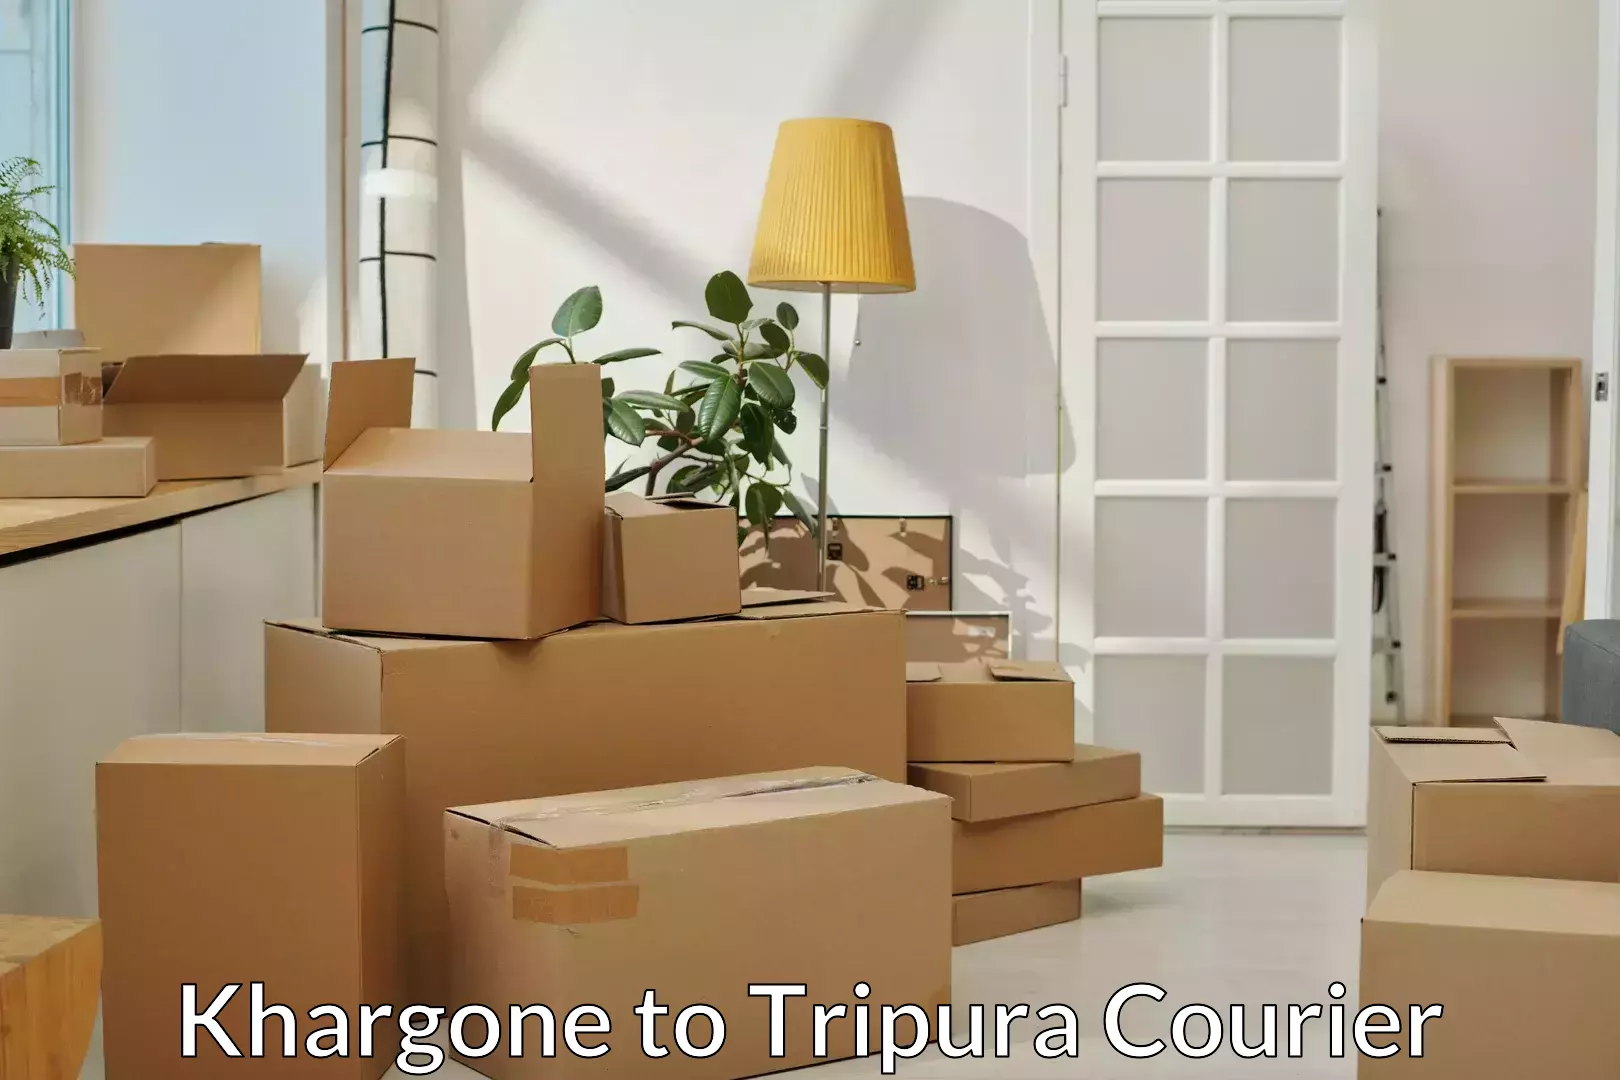 Full-service relocation in Khargone to Tripura